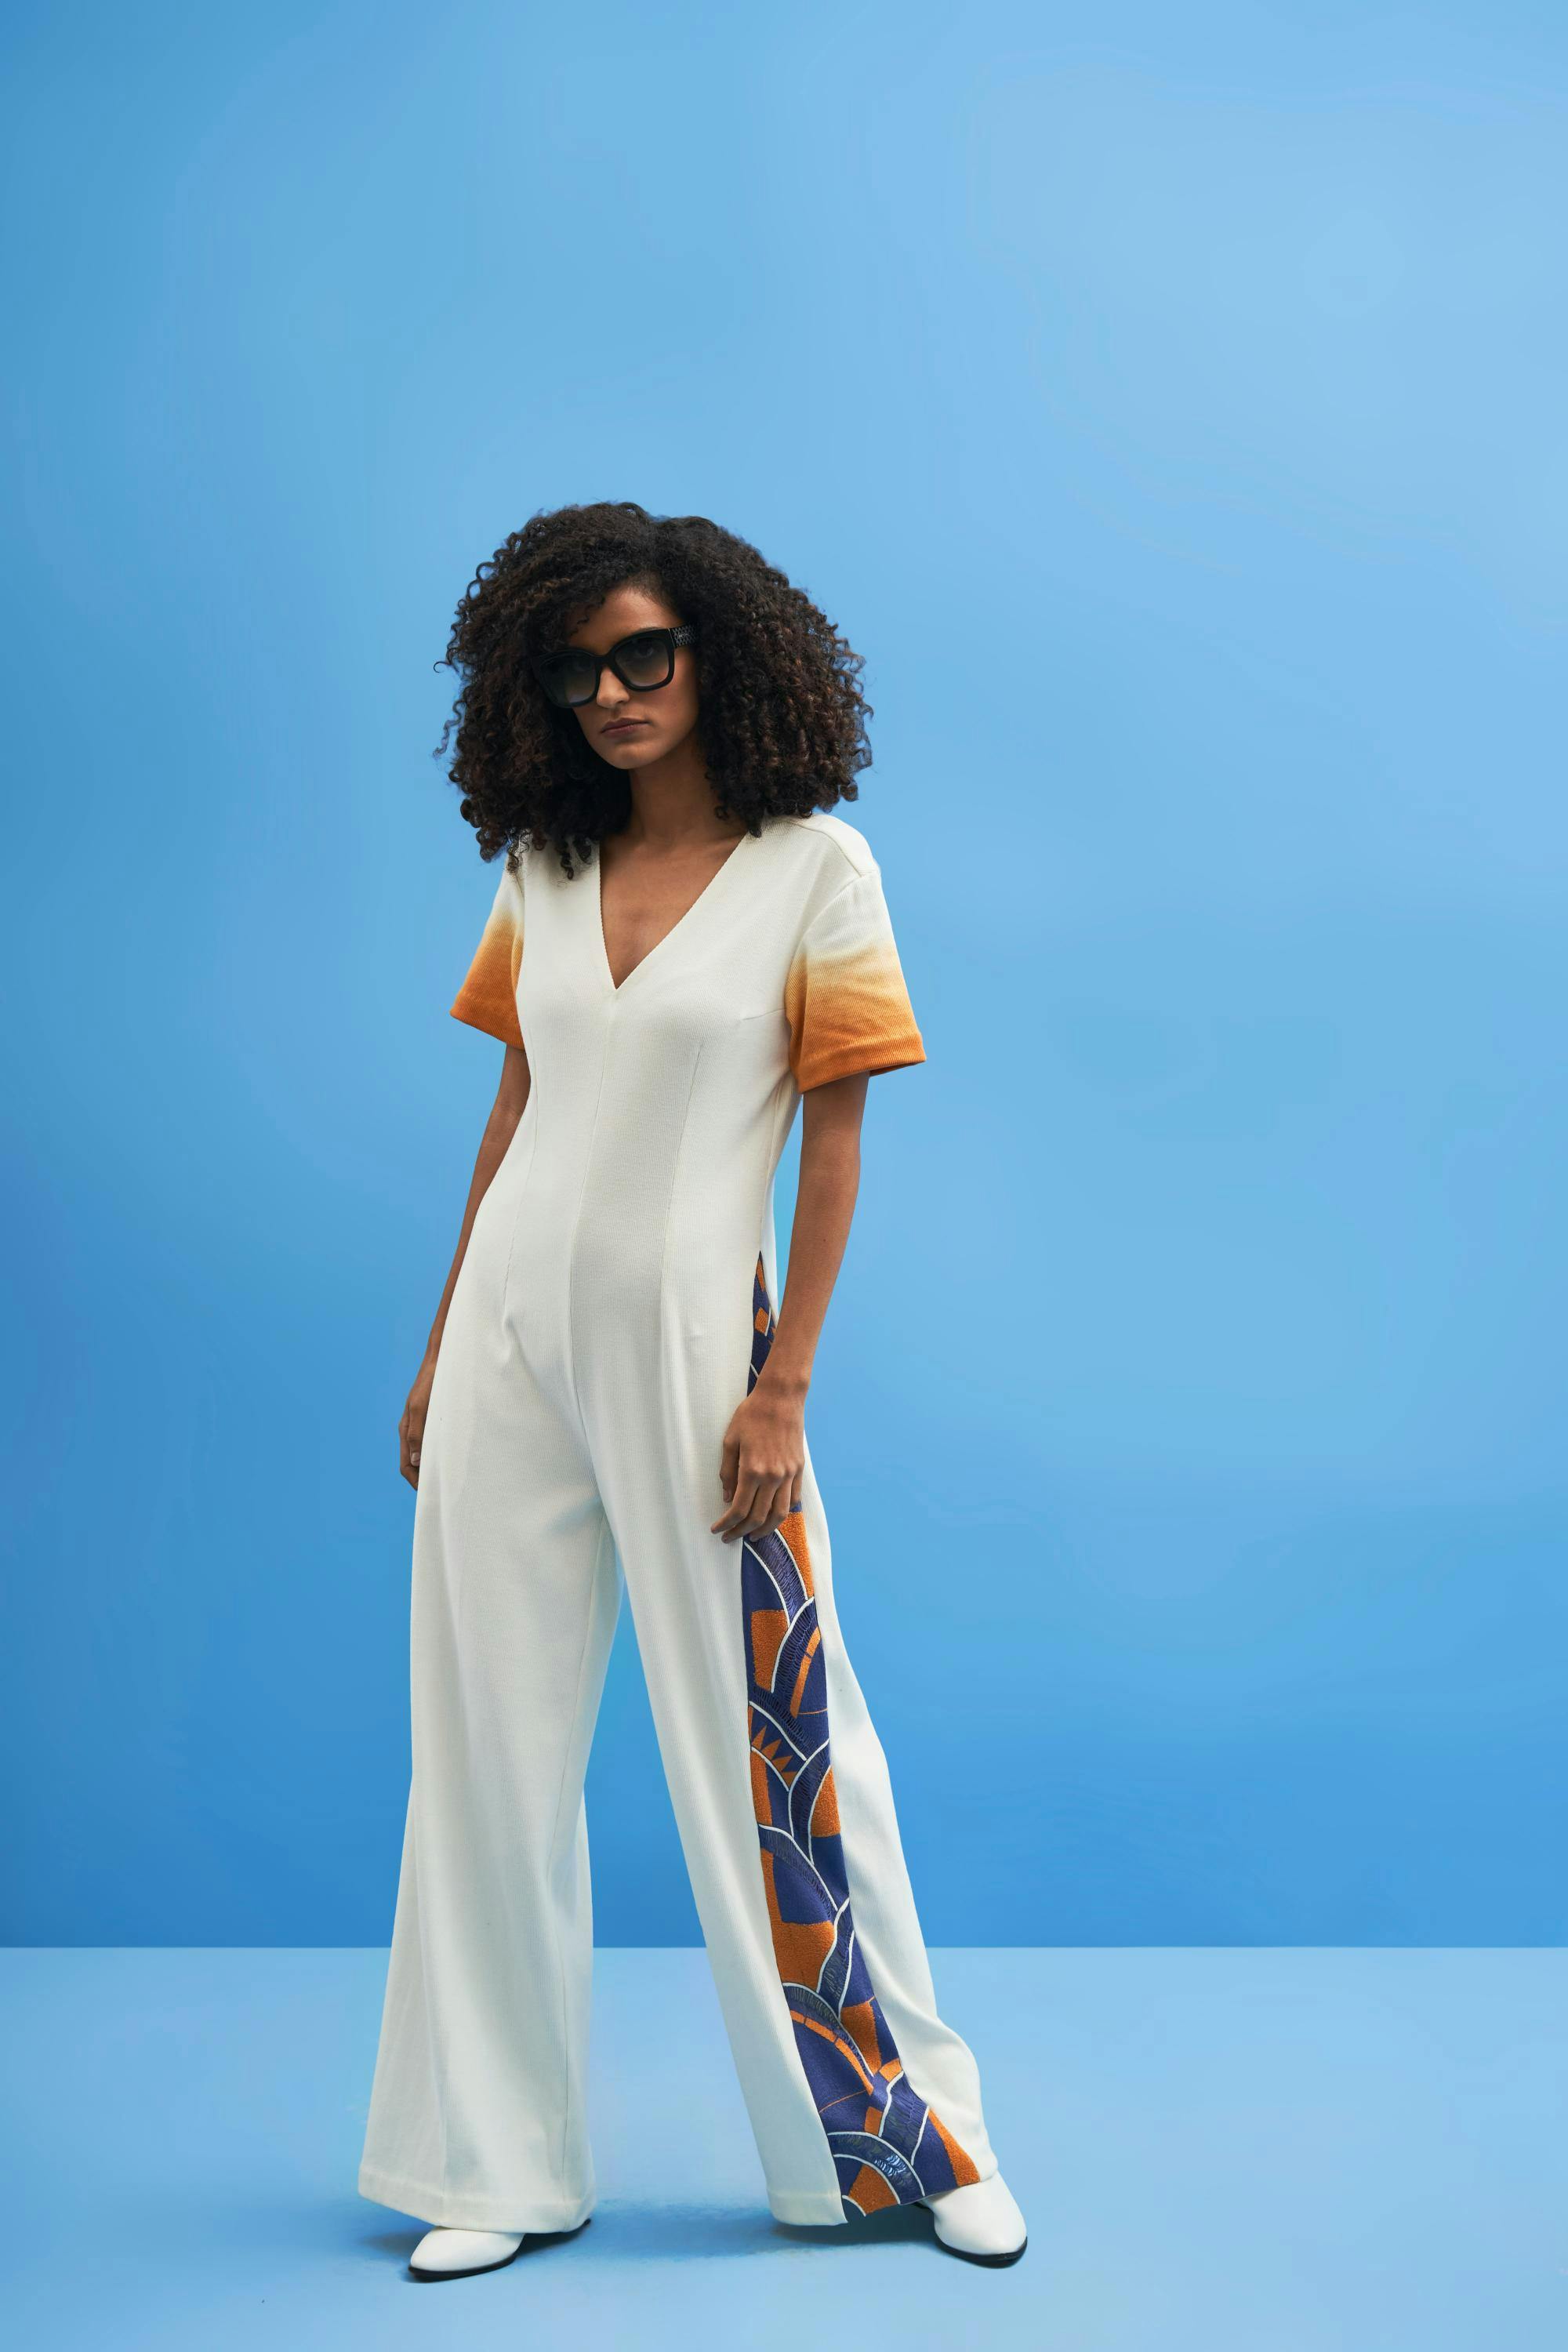 Off-White Lunette Embroidered Jumpsuit, a product by Siddhant Agrawal Label